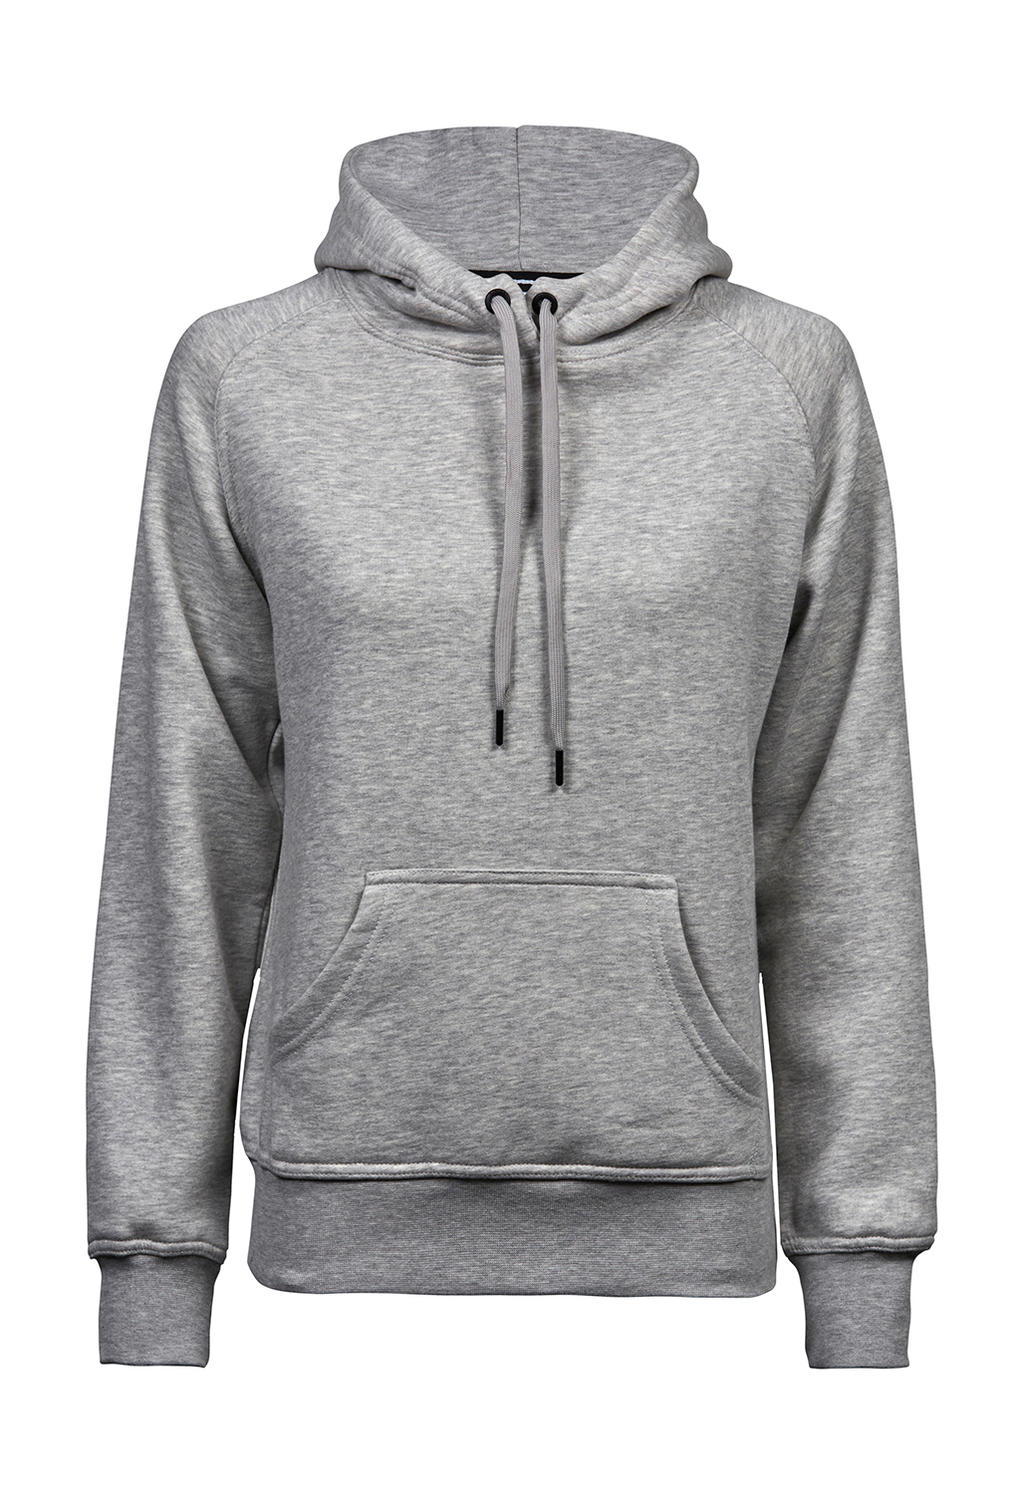  Ladies Hooded Sweat in Farbe Heather Grey